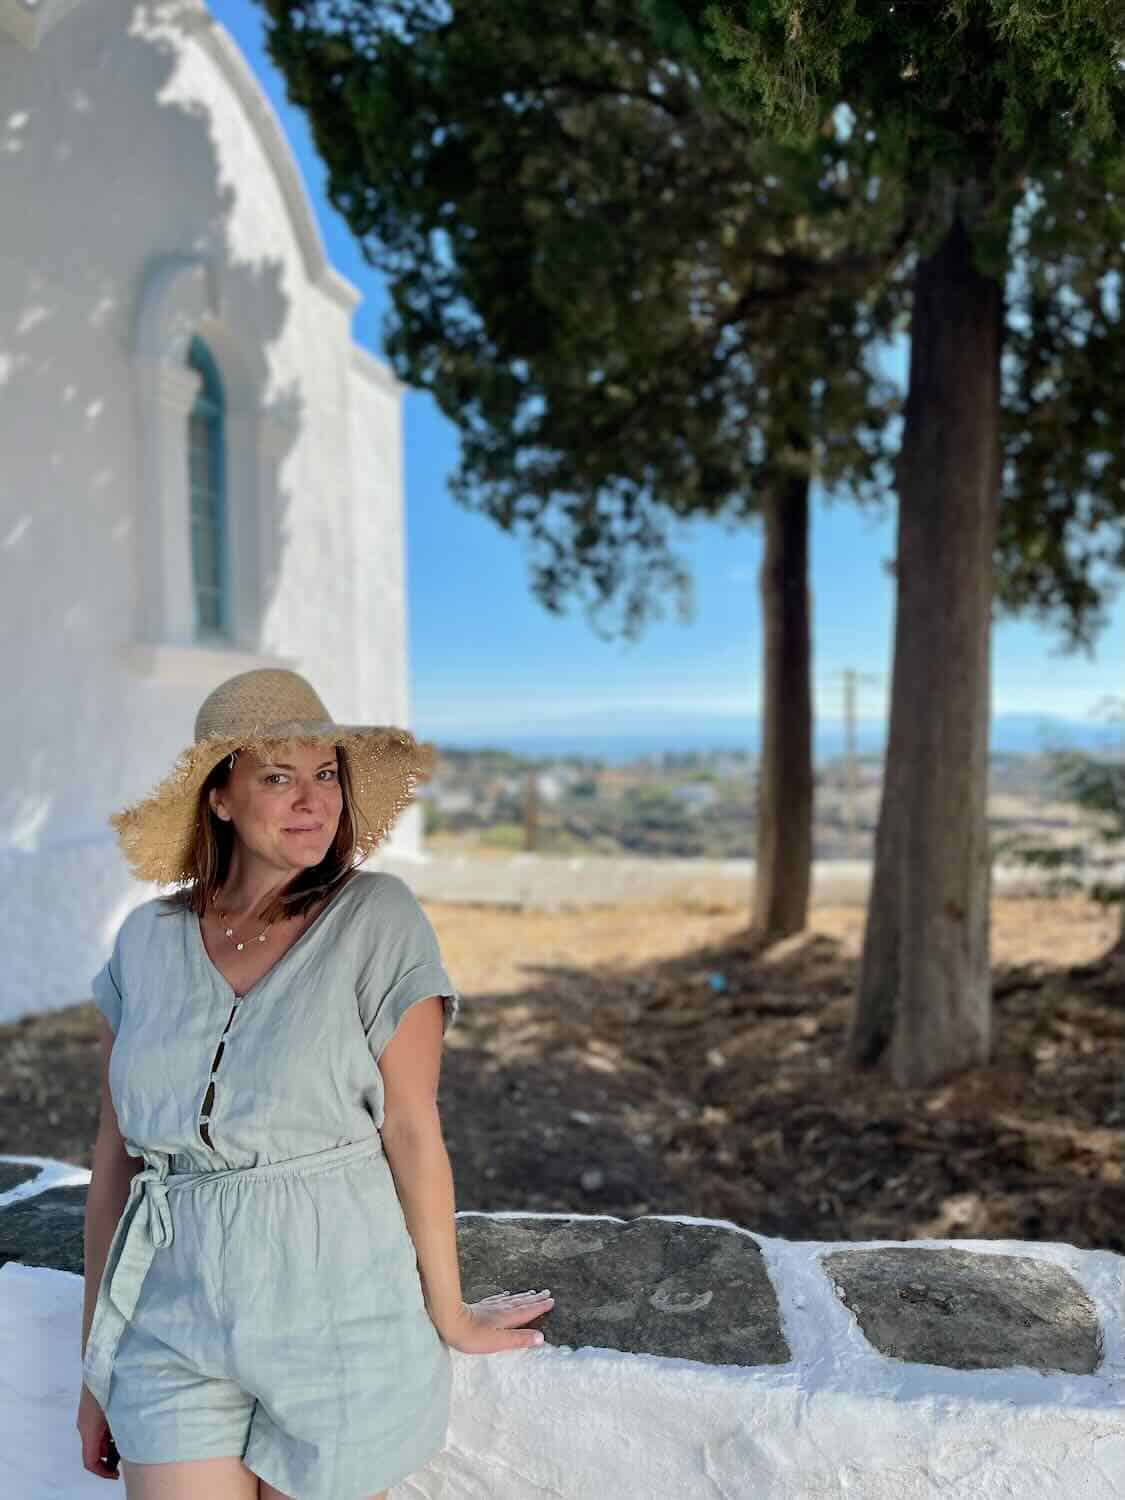 A traveler in casual summer attire poses with a straw hat against the backdrop of a traditional white-walled Sifnos church,